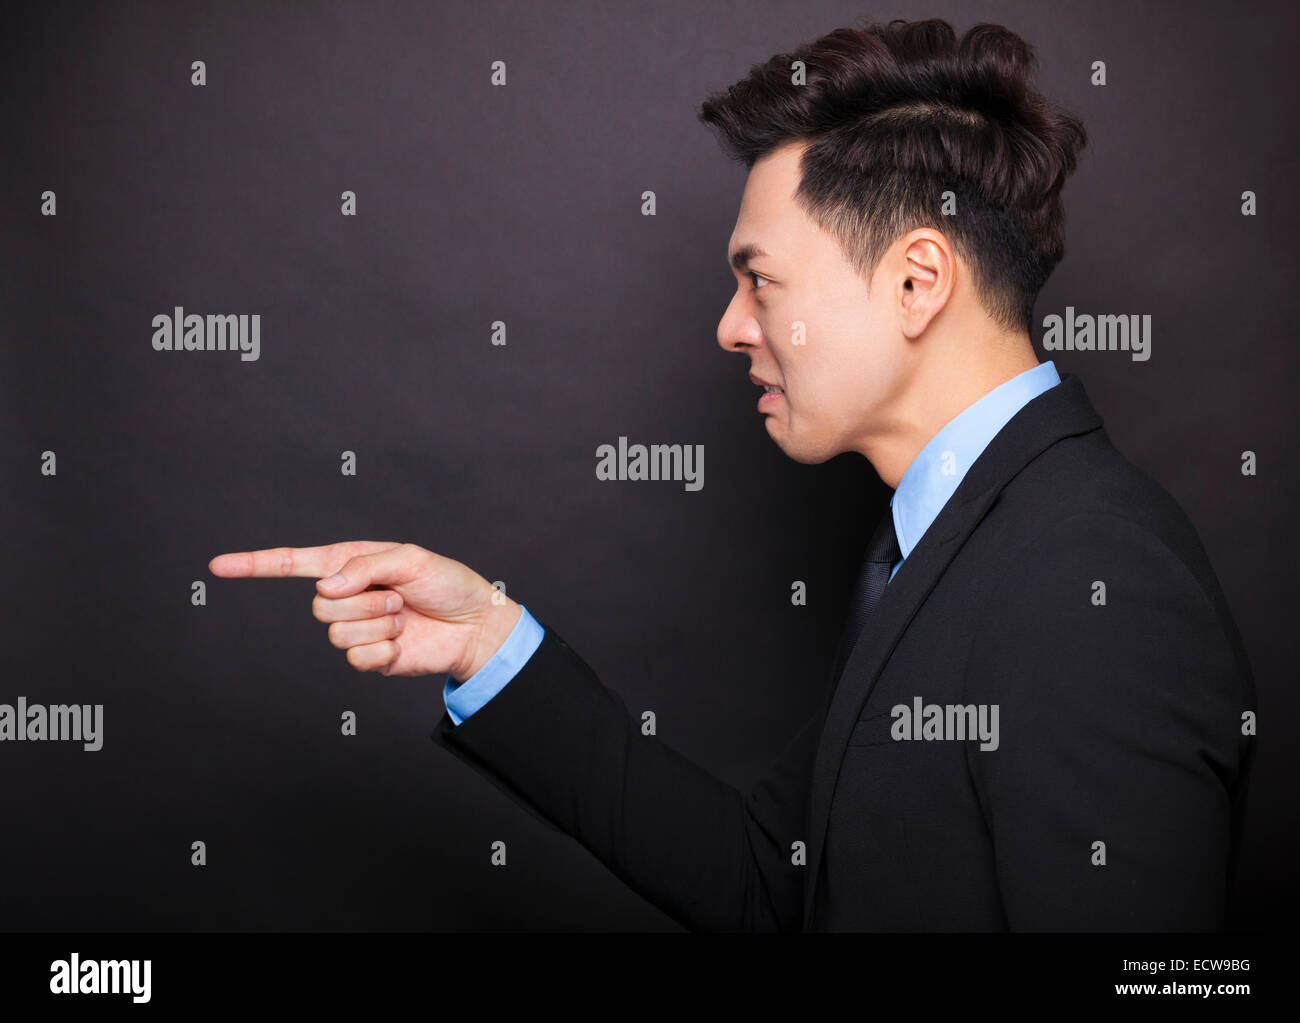 side view angry businessman standing before black background Stock Photo